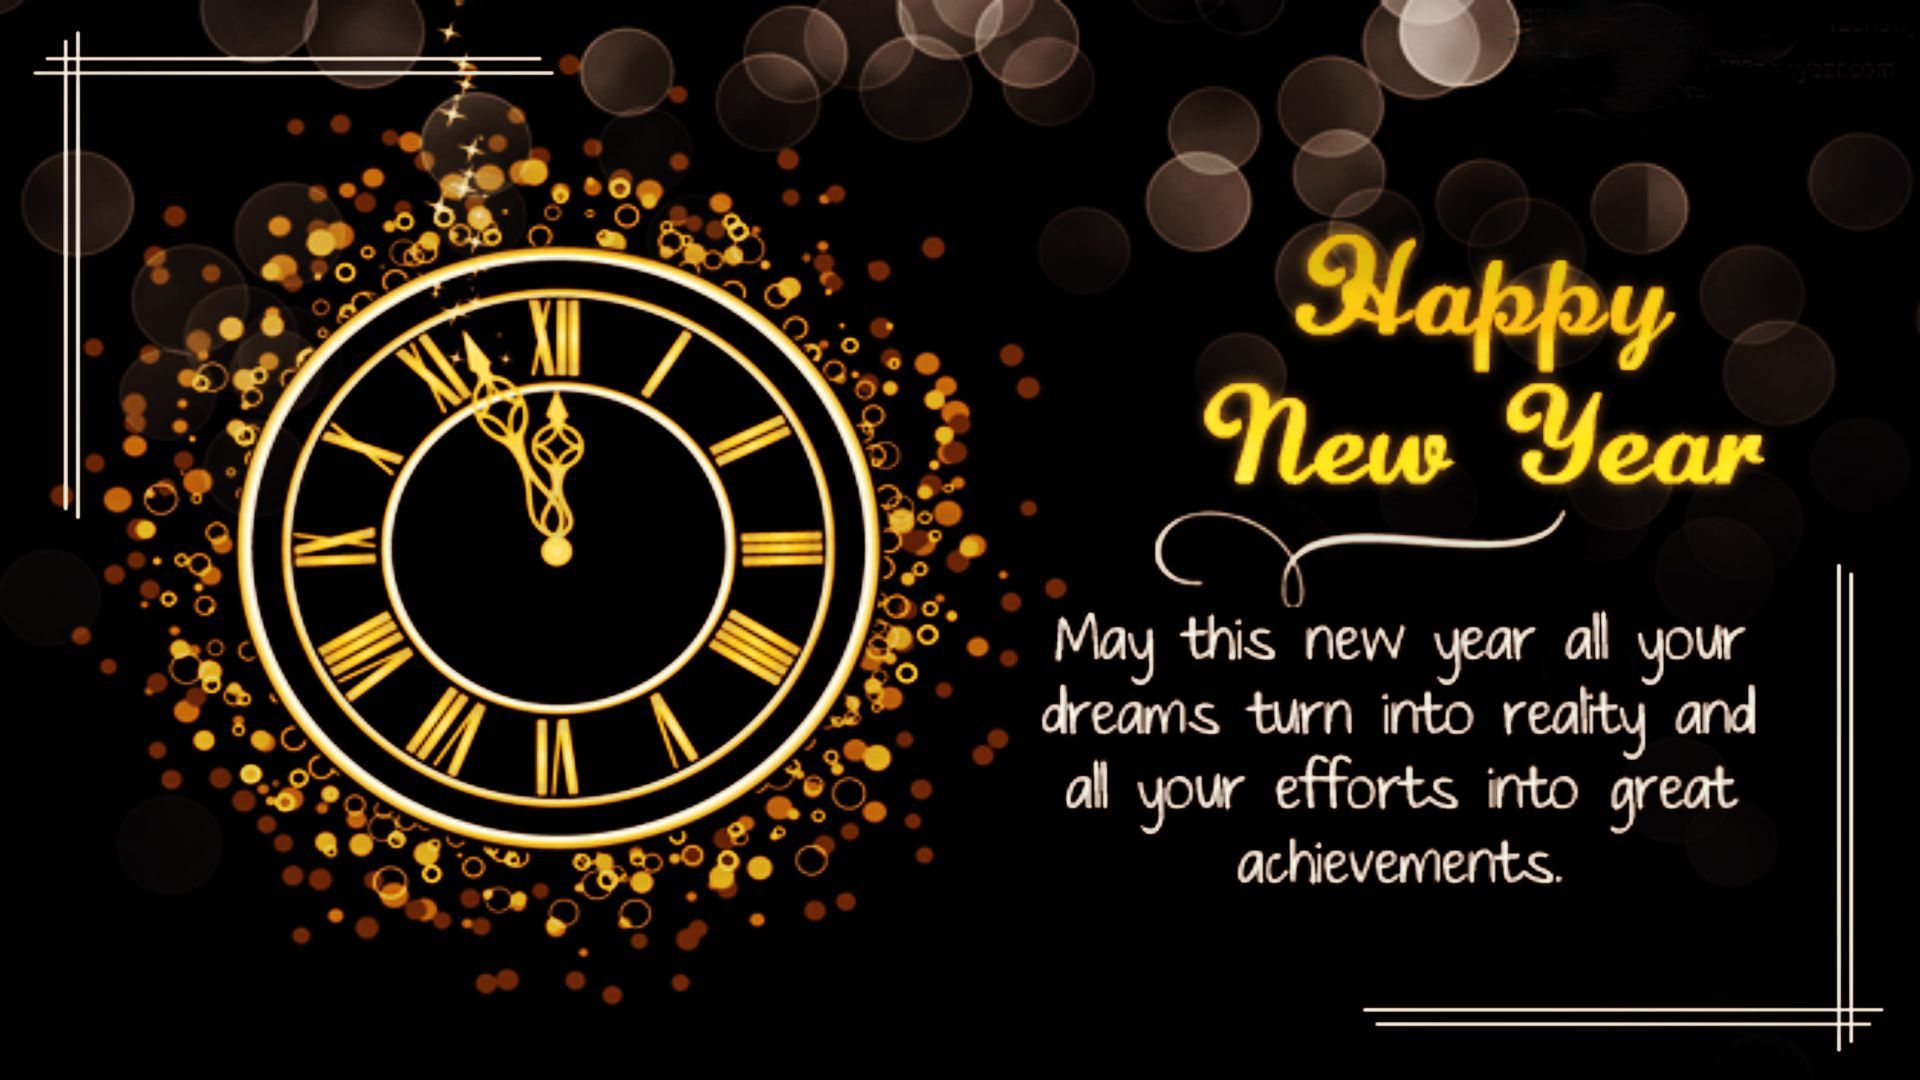 Happy New Year 2016 Image, Picture, Wallpaper, Clip art, Printable Cards, Greeting Car. Happy new year message, Happy new year greetings, Happy new year wishes